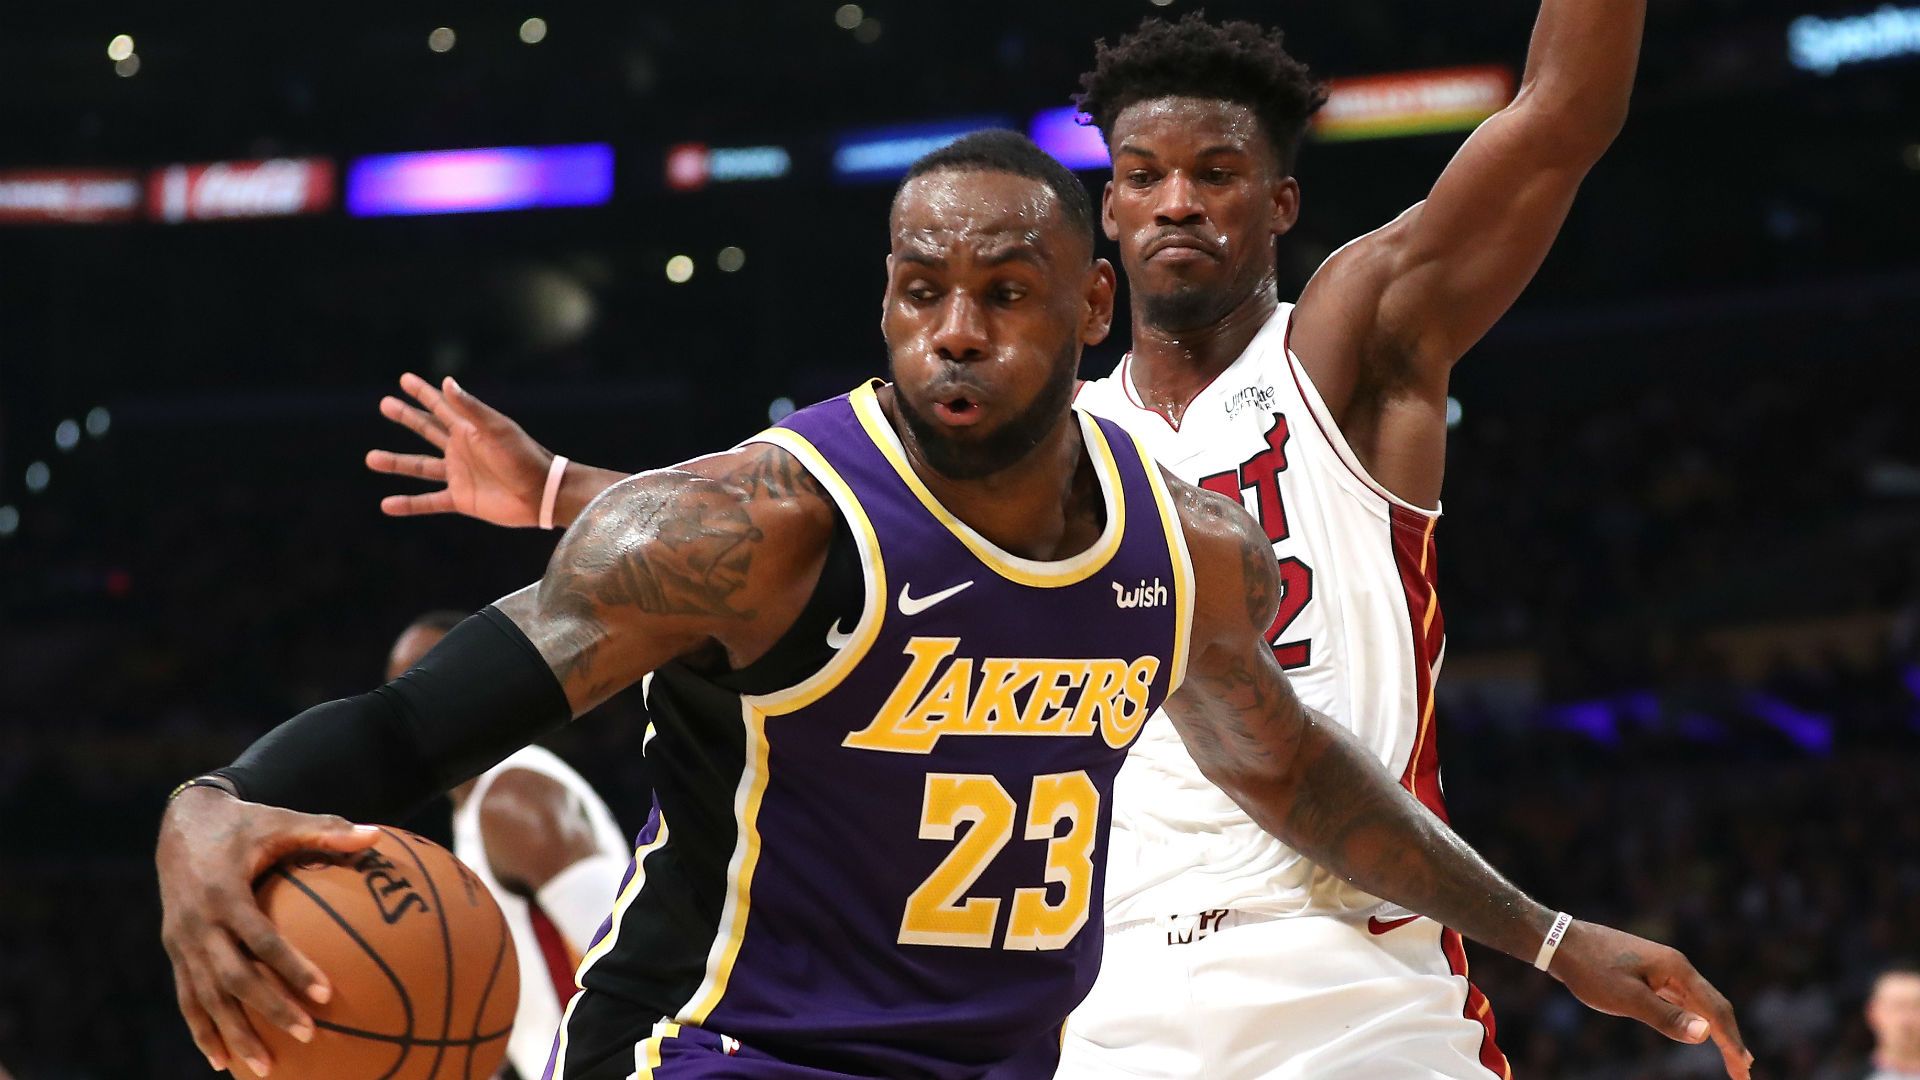 NBA Finals schedule 2020: Dates, times, TV channels for Heat vs. Lakers